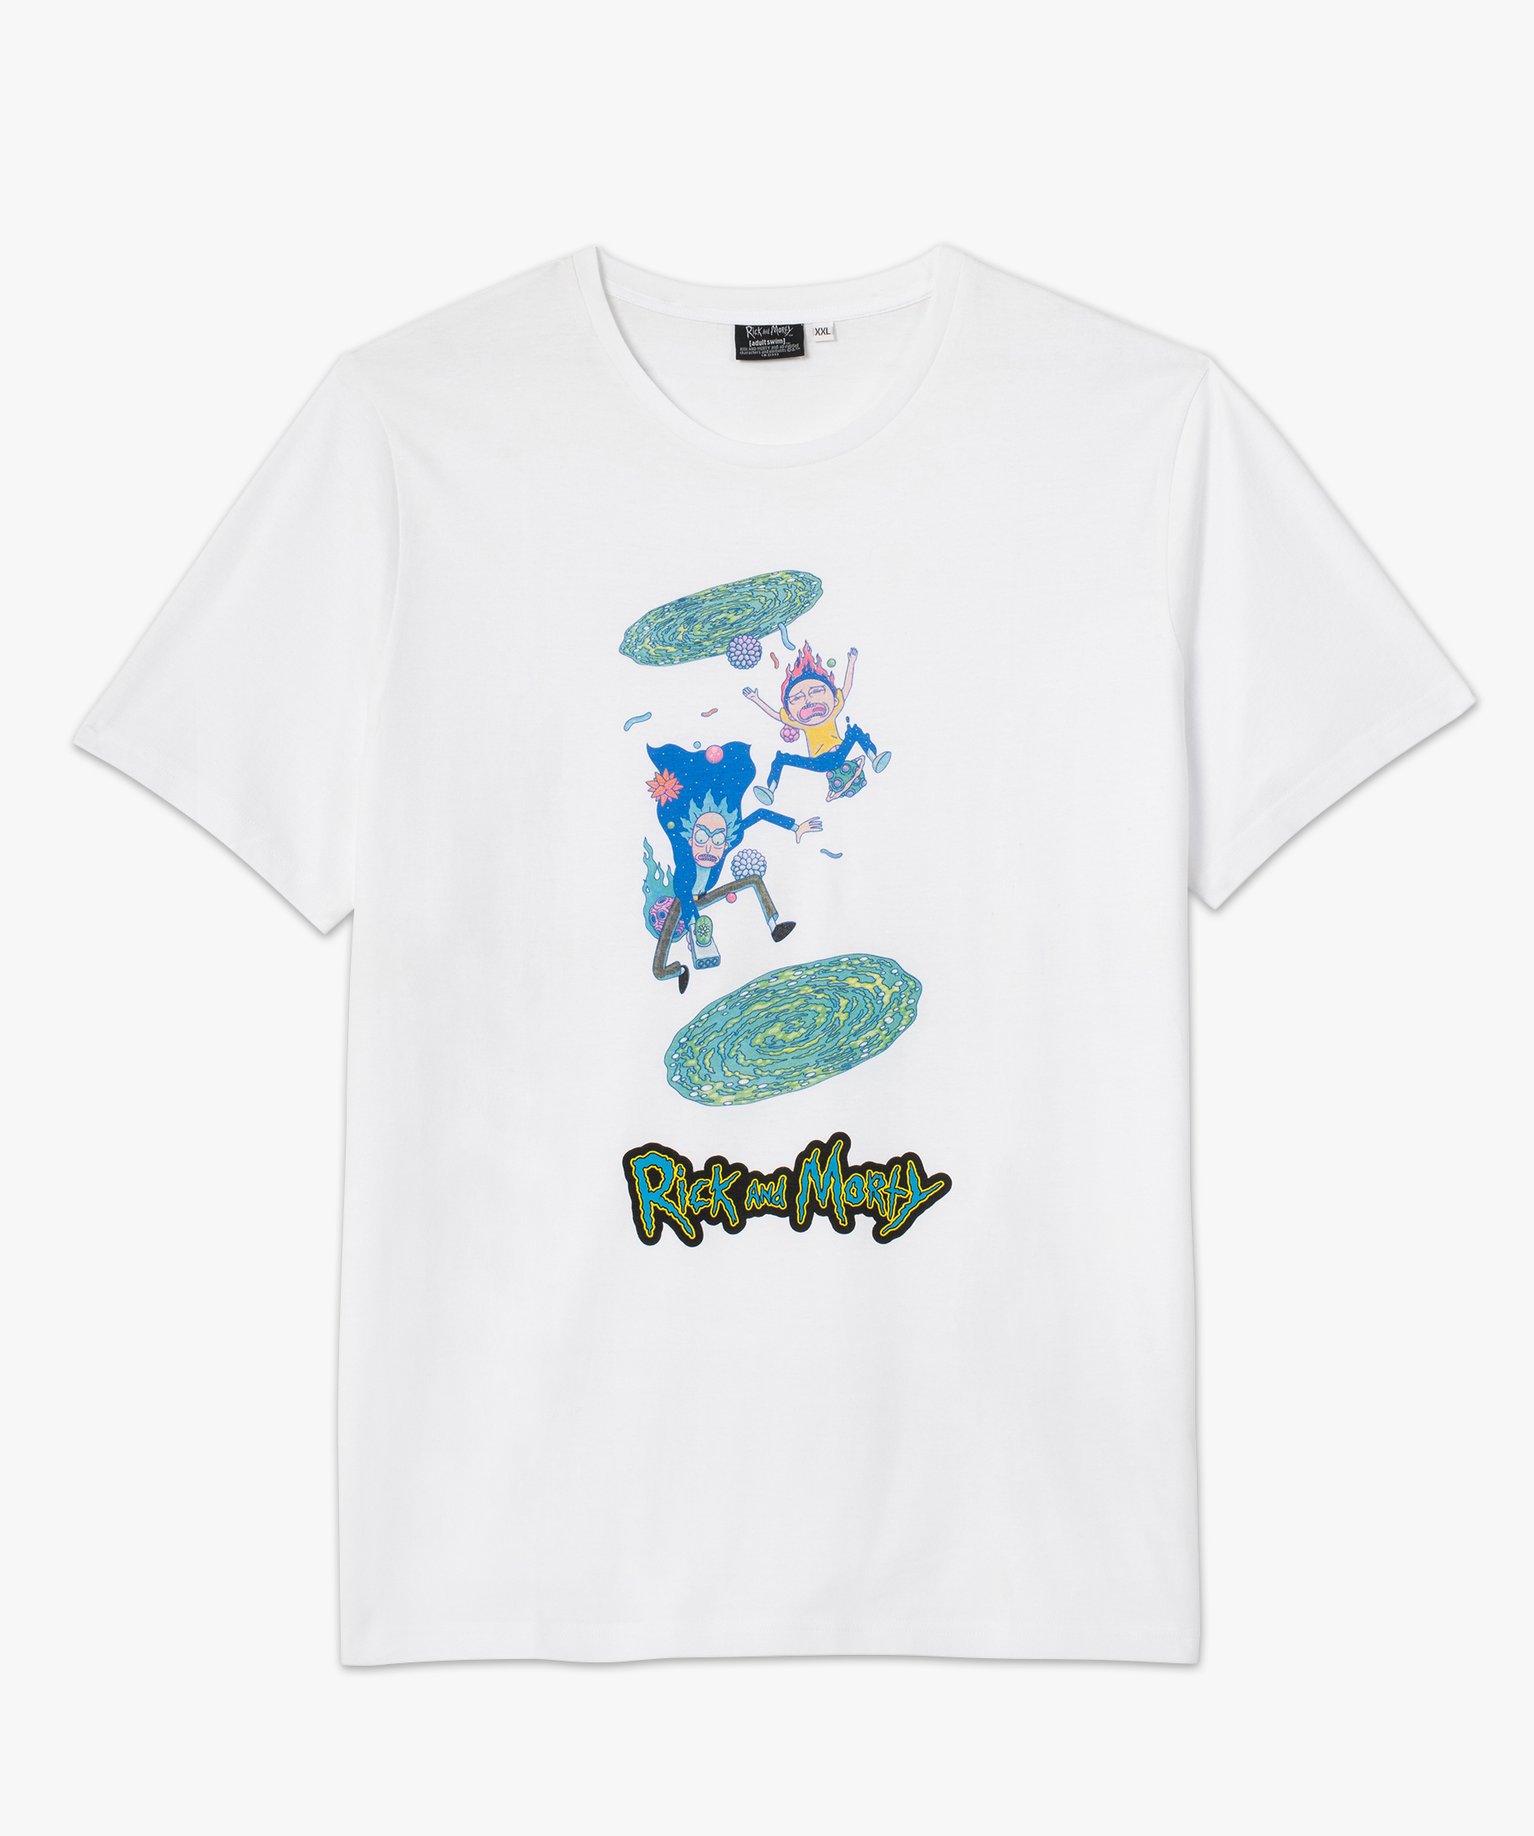 tee-shirt homme a manches courtes imprime - rick morty blanc tee-shirts